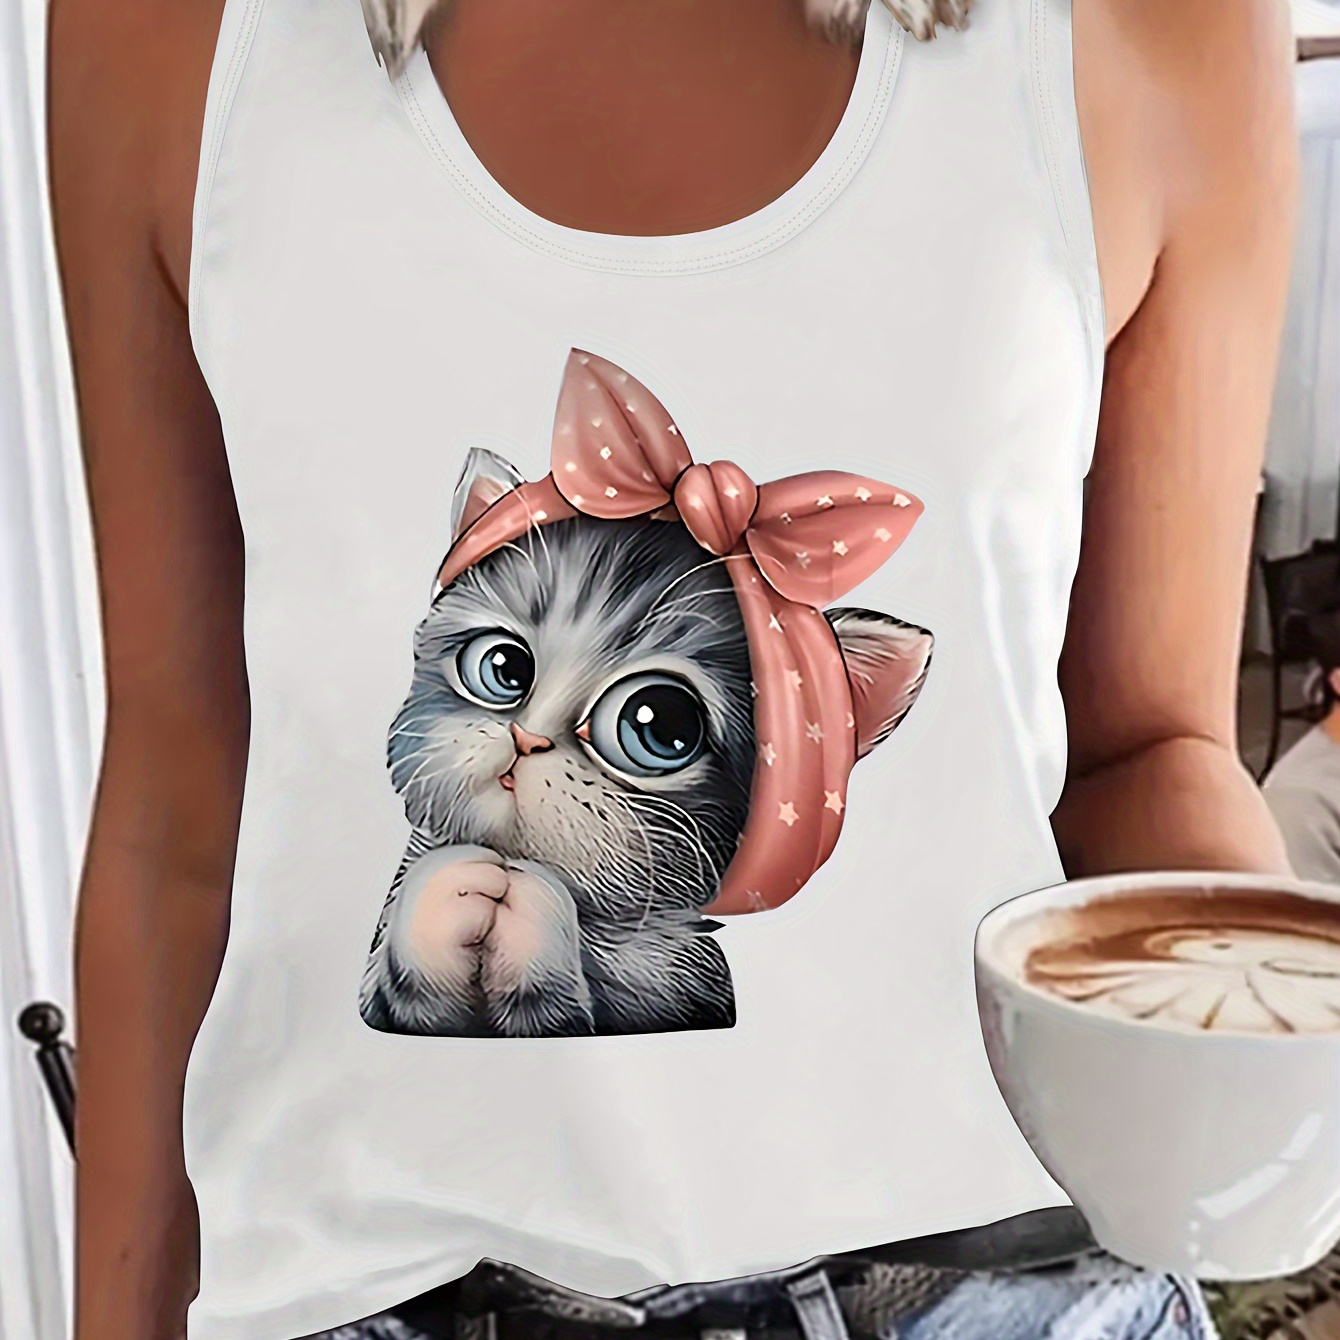 

Cat Print Tank Top, Sleeveless Crew Neck Casual Top For Summer & Spring, Women's Clothing